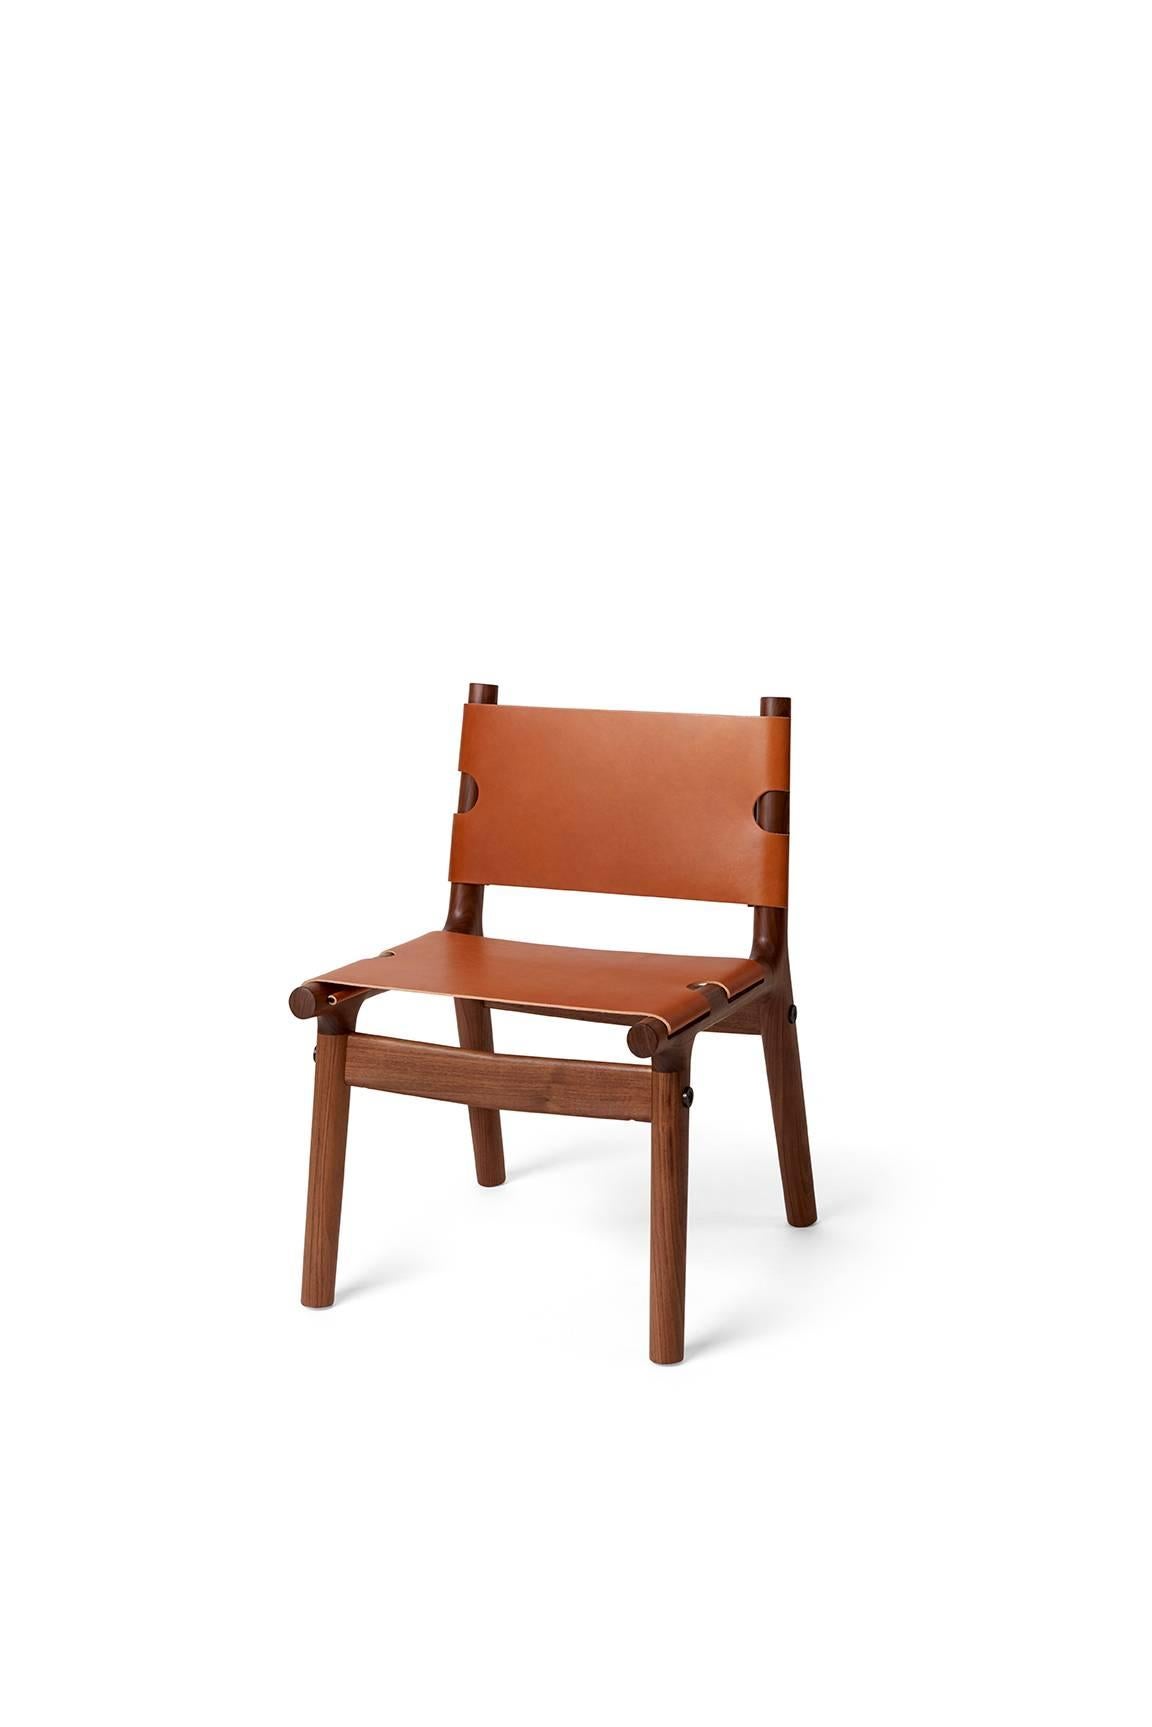 Contemporary 204 Side Chair, Modern Ash Hardwood, Tan Harness Leather, and Polished Aluminium For Sale